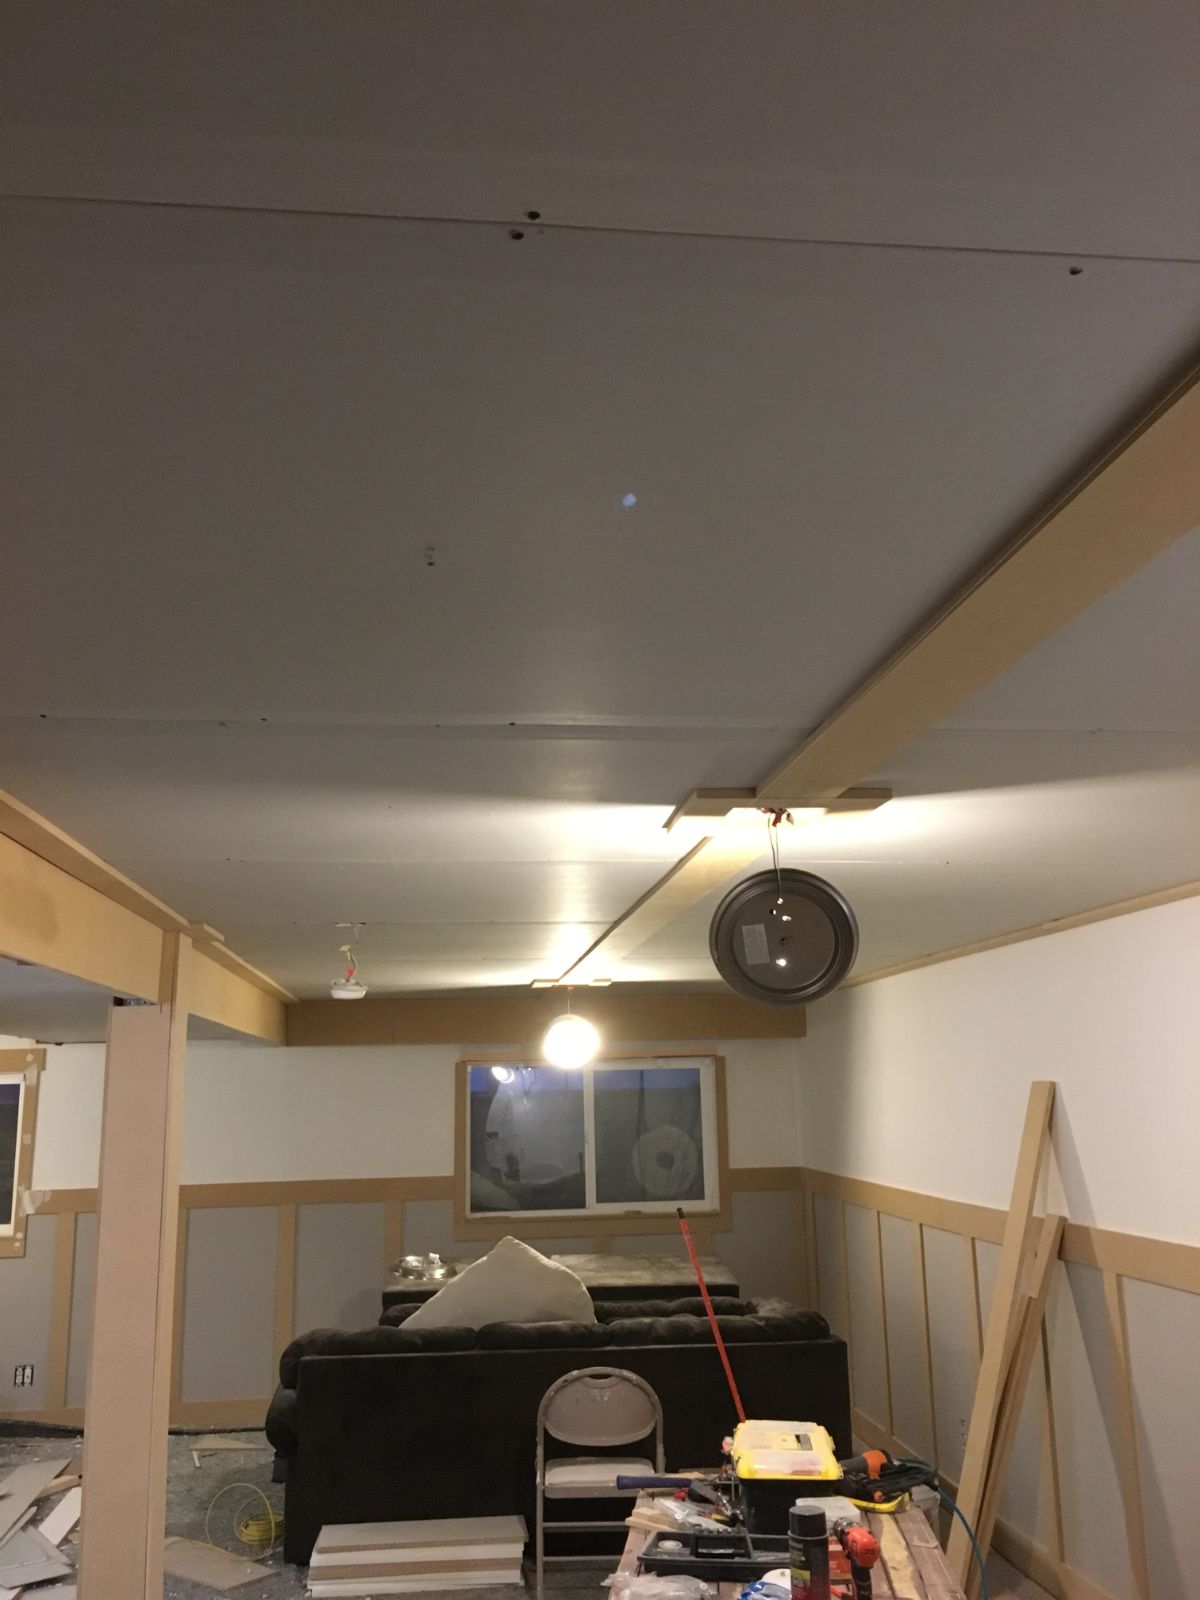 Start of the ceiling